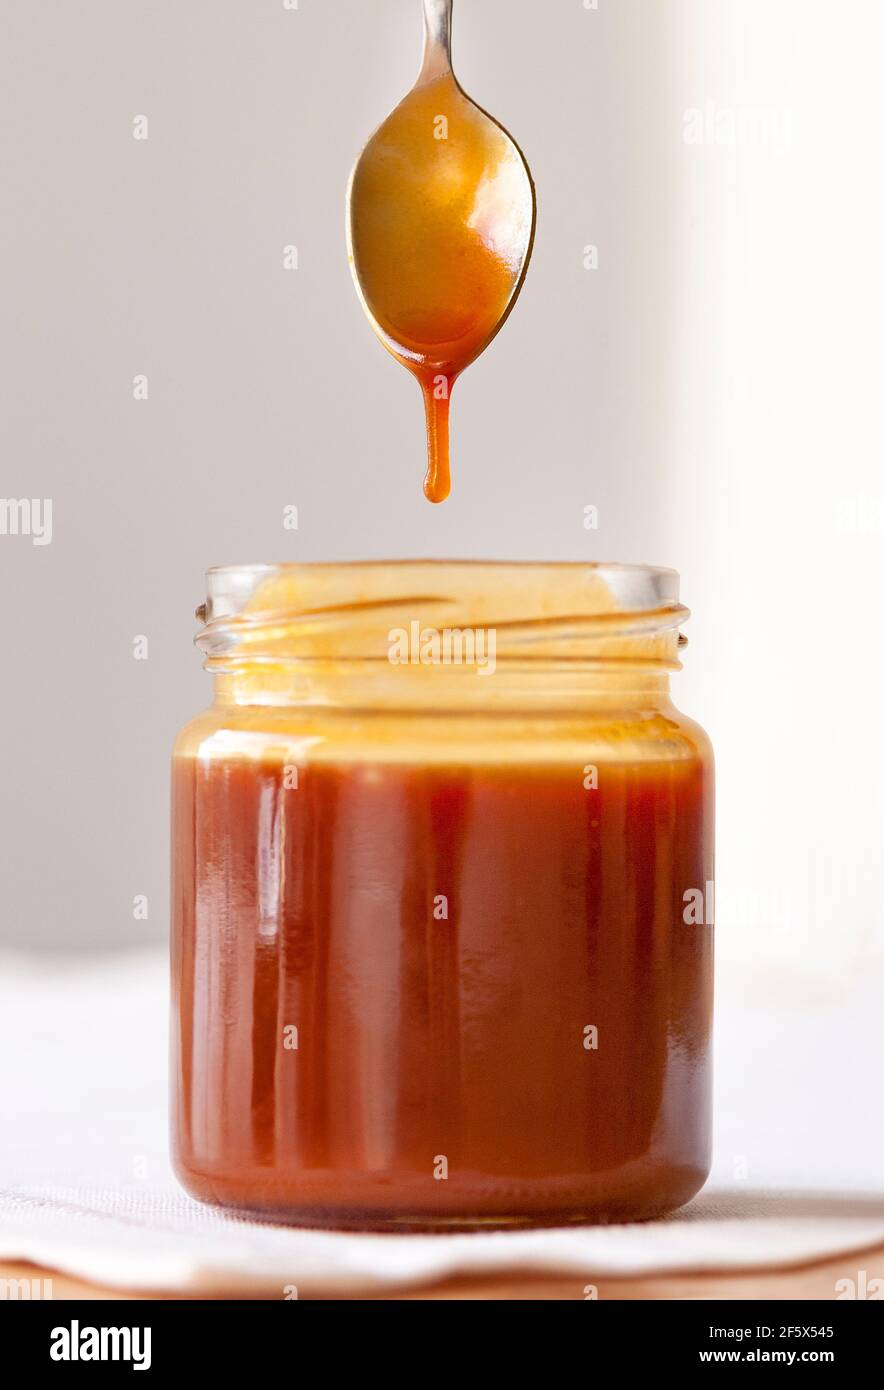 Jar of delicious homemade caramel with a drop falling from a spoon Stock Photo